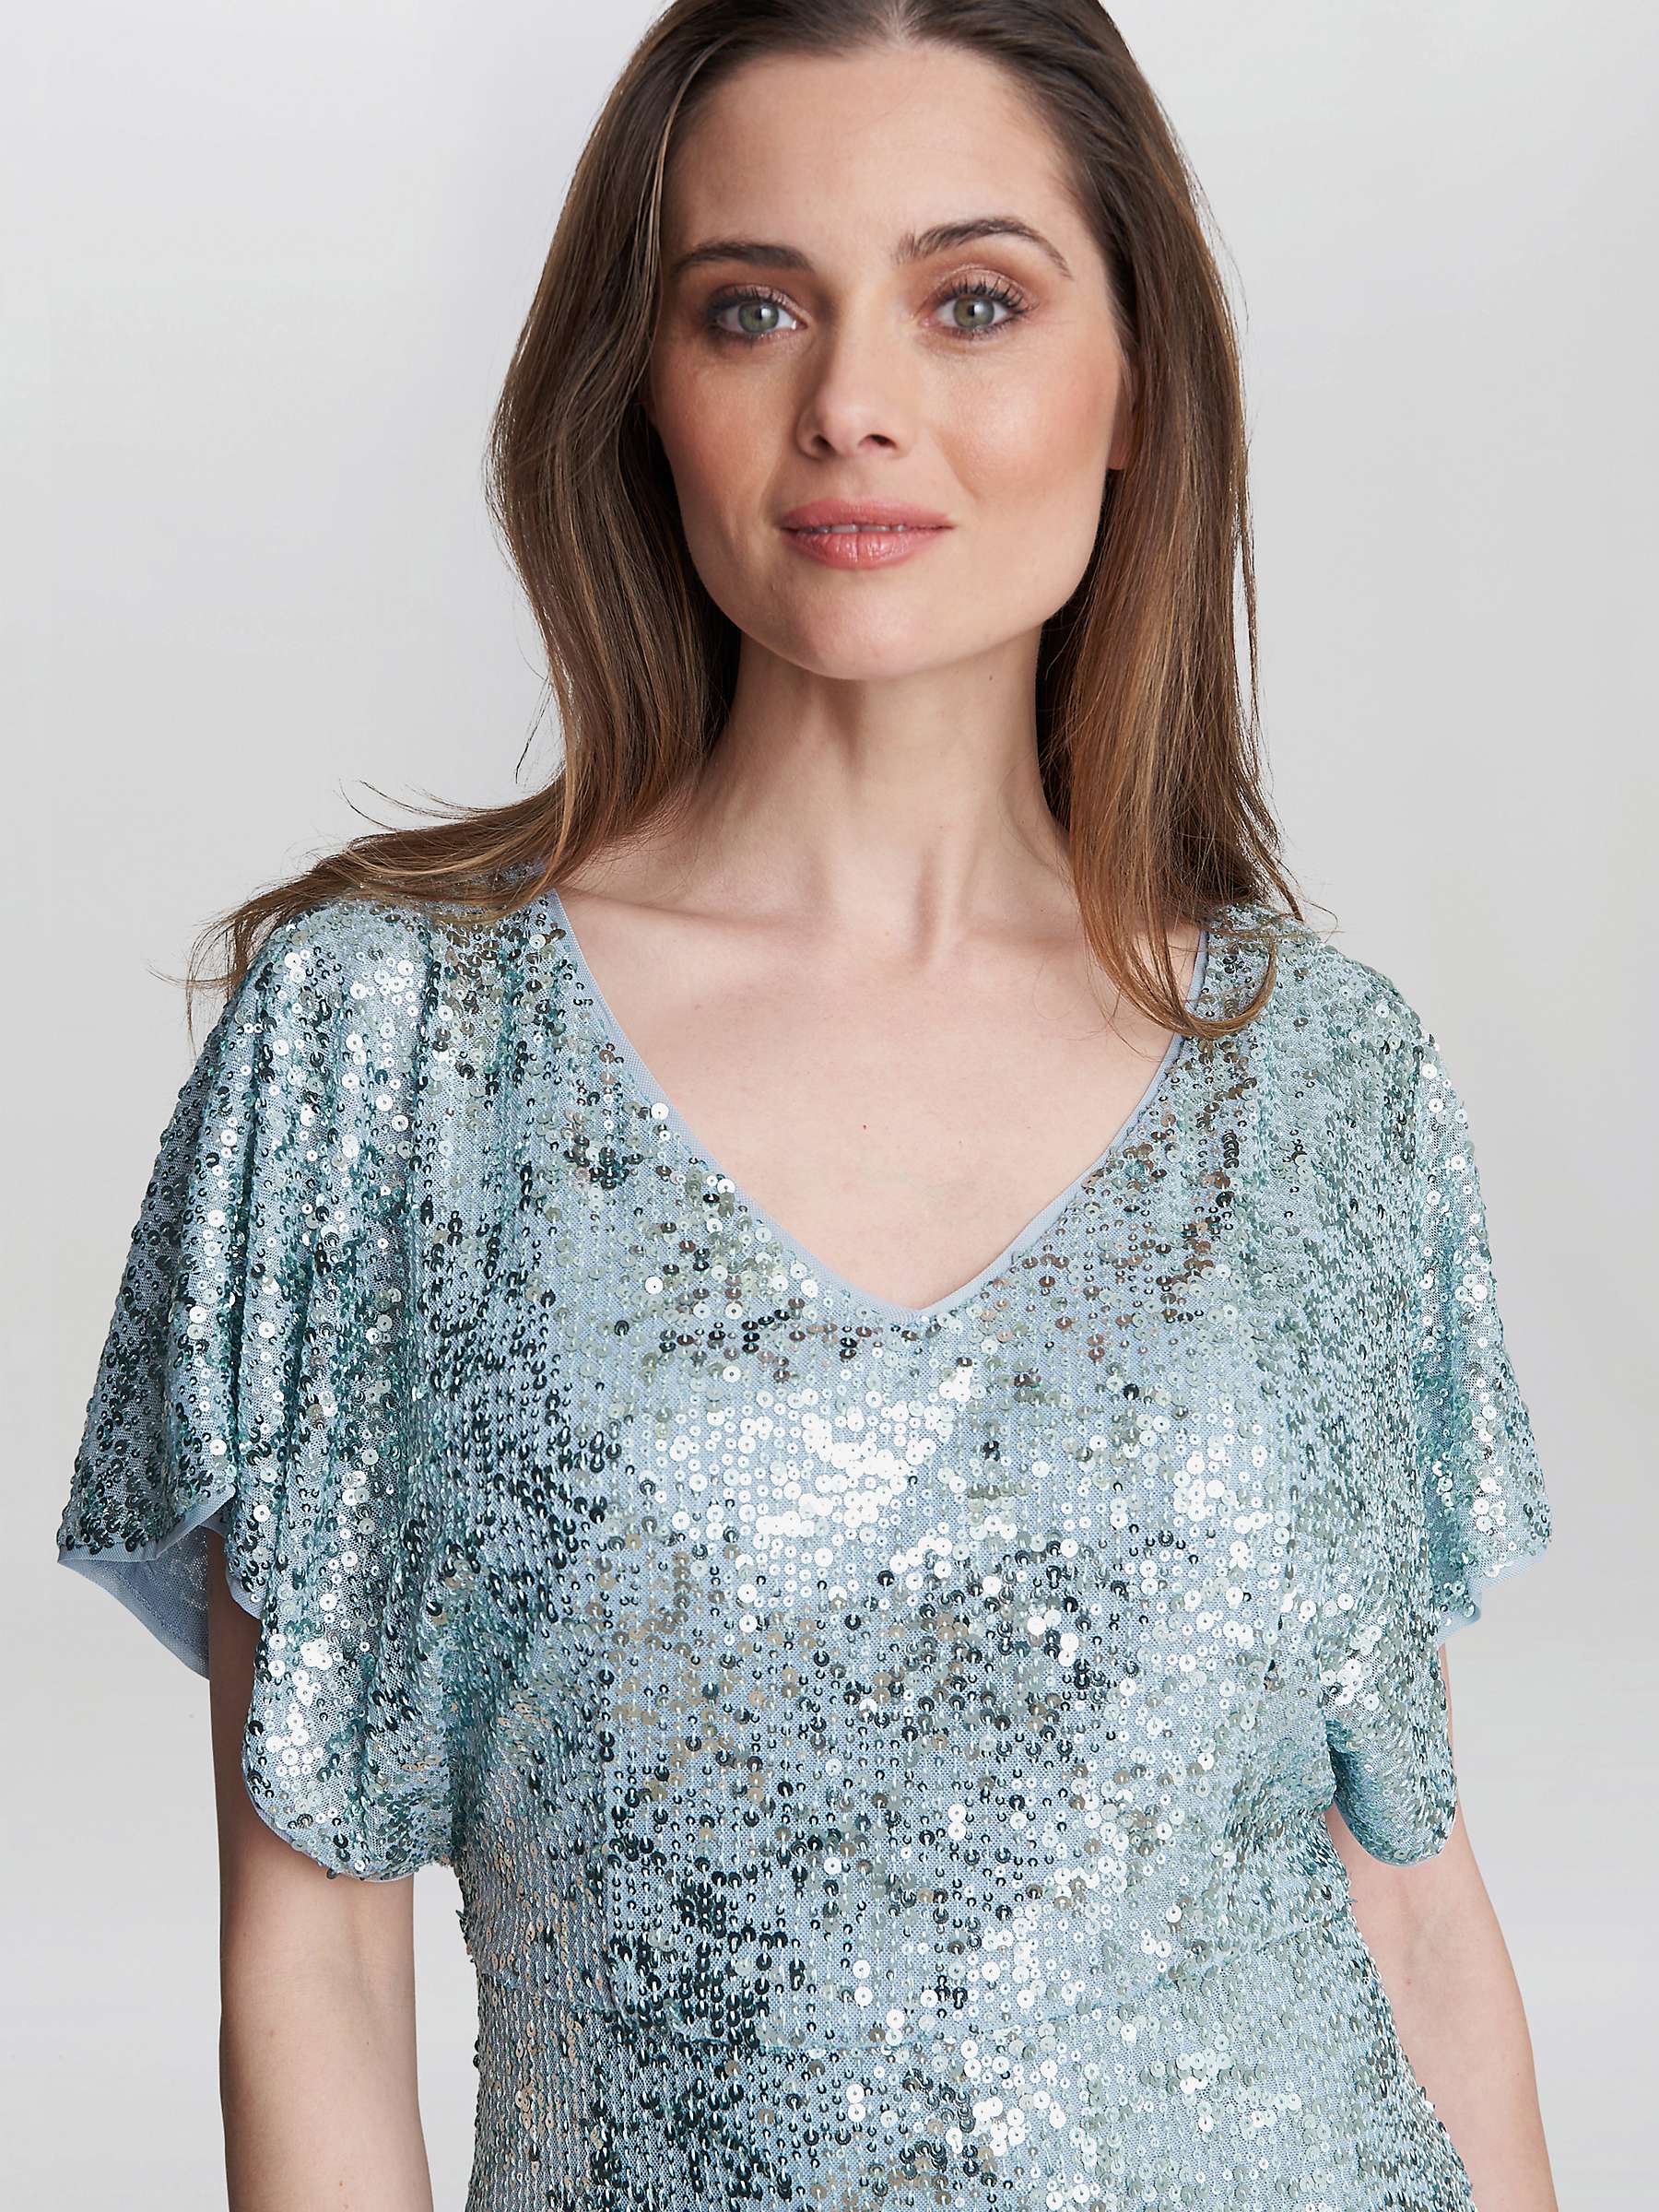 Buy Gina Bacconi Courtney Sequin Maxi Dress, Sky Blue Online at johnlewis.com